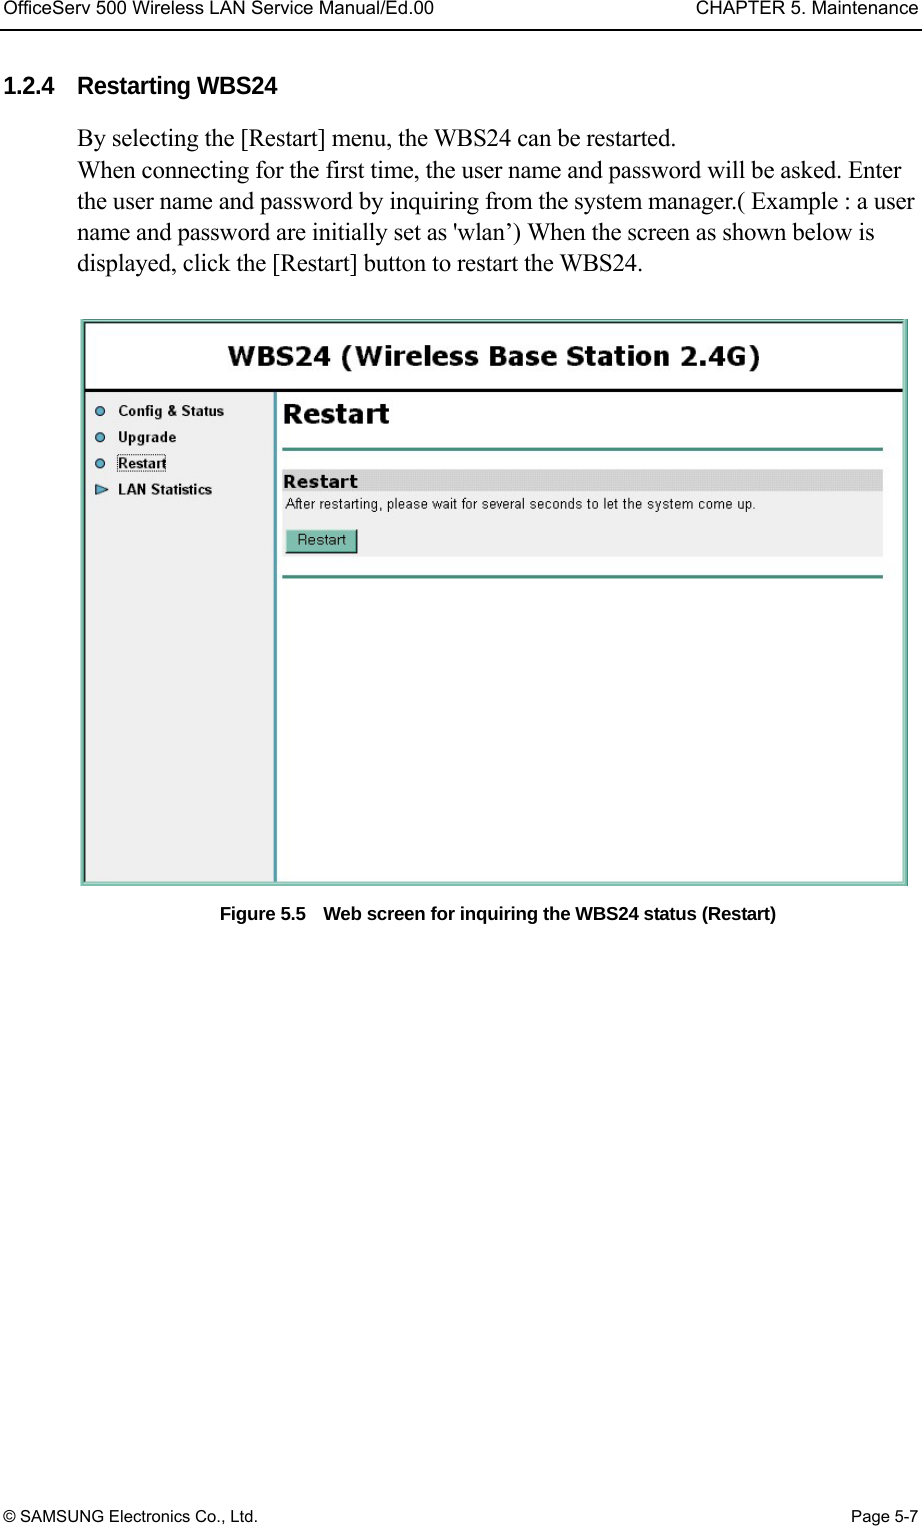 OfficeServ 500 Wireless LAN Service Manual/Ed.00  CHAPTER 5. Maintenance © SAMSUNG Electronics Co., Ltd.  Page 5-7 1.2.4 Restarting WBS24  By selecting the [Restart] menu, the WBS24 can be restarted. When connecting for the first time, the user name and password will be asked. Enter the user name and password by inquiring from the system manager.( Example : a user name and password are initially set as &apos;wlan’) When the screen as shown below is displayed, click the [Restart] button to restart the WBS24.  Figure 5.5    Web screen for inquiring the WBS24 status (Restart)  